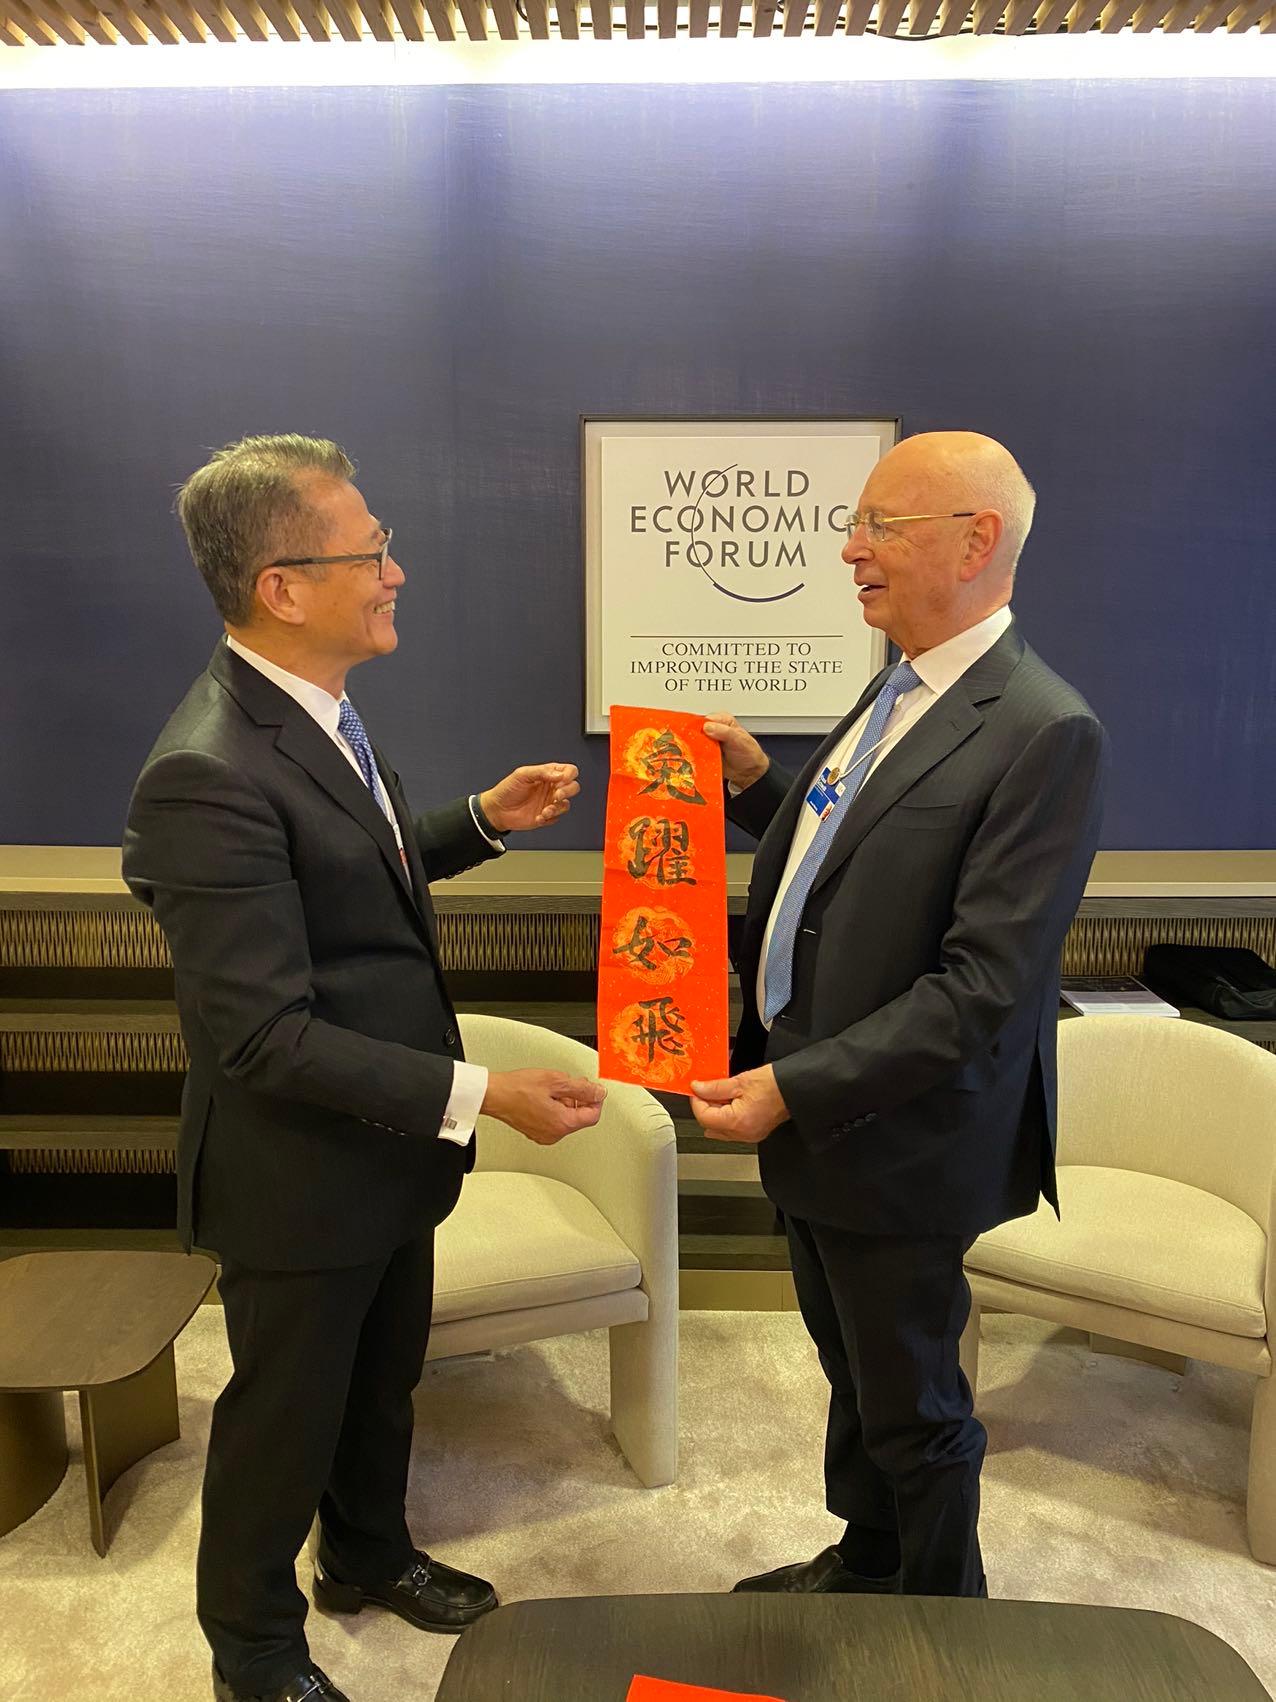 The Financial Secretary, Mr Paul Chan (left) met the Founder and Executive Chairman of the World Economic Forum, Professor Klaus Schwab (right). As the Chinese New Year is arriving, Mr Chan presented a spring couplet to Professor Schwab and wishes him a good year of the Rabbit.